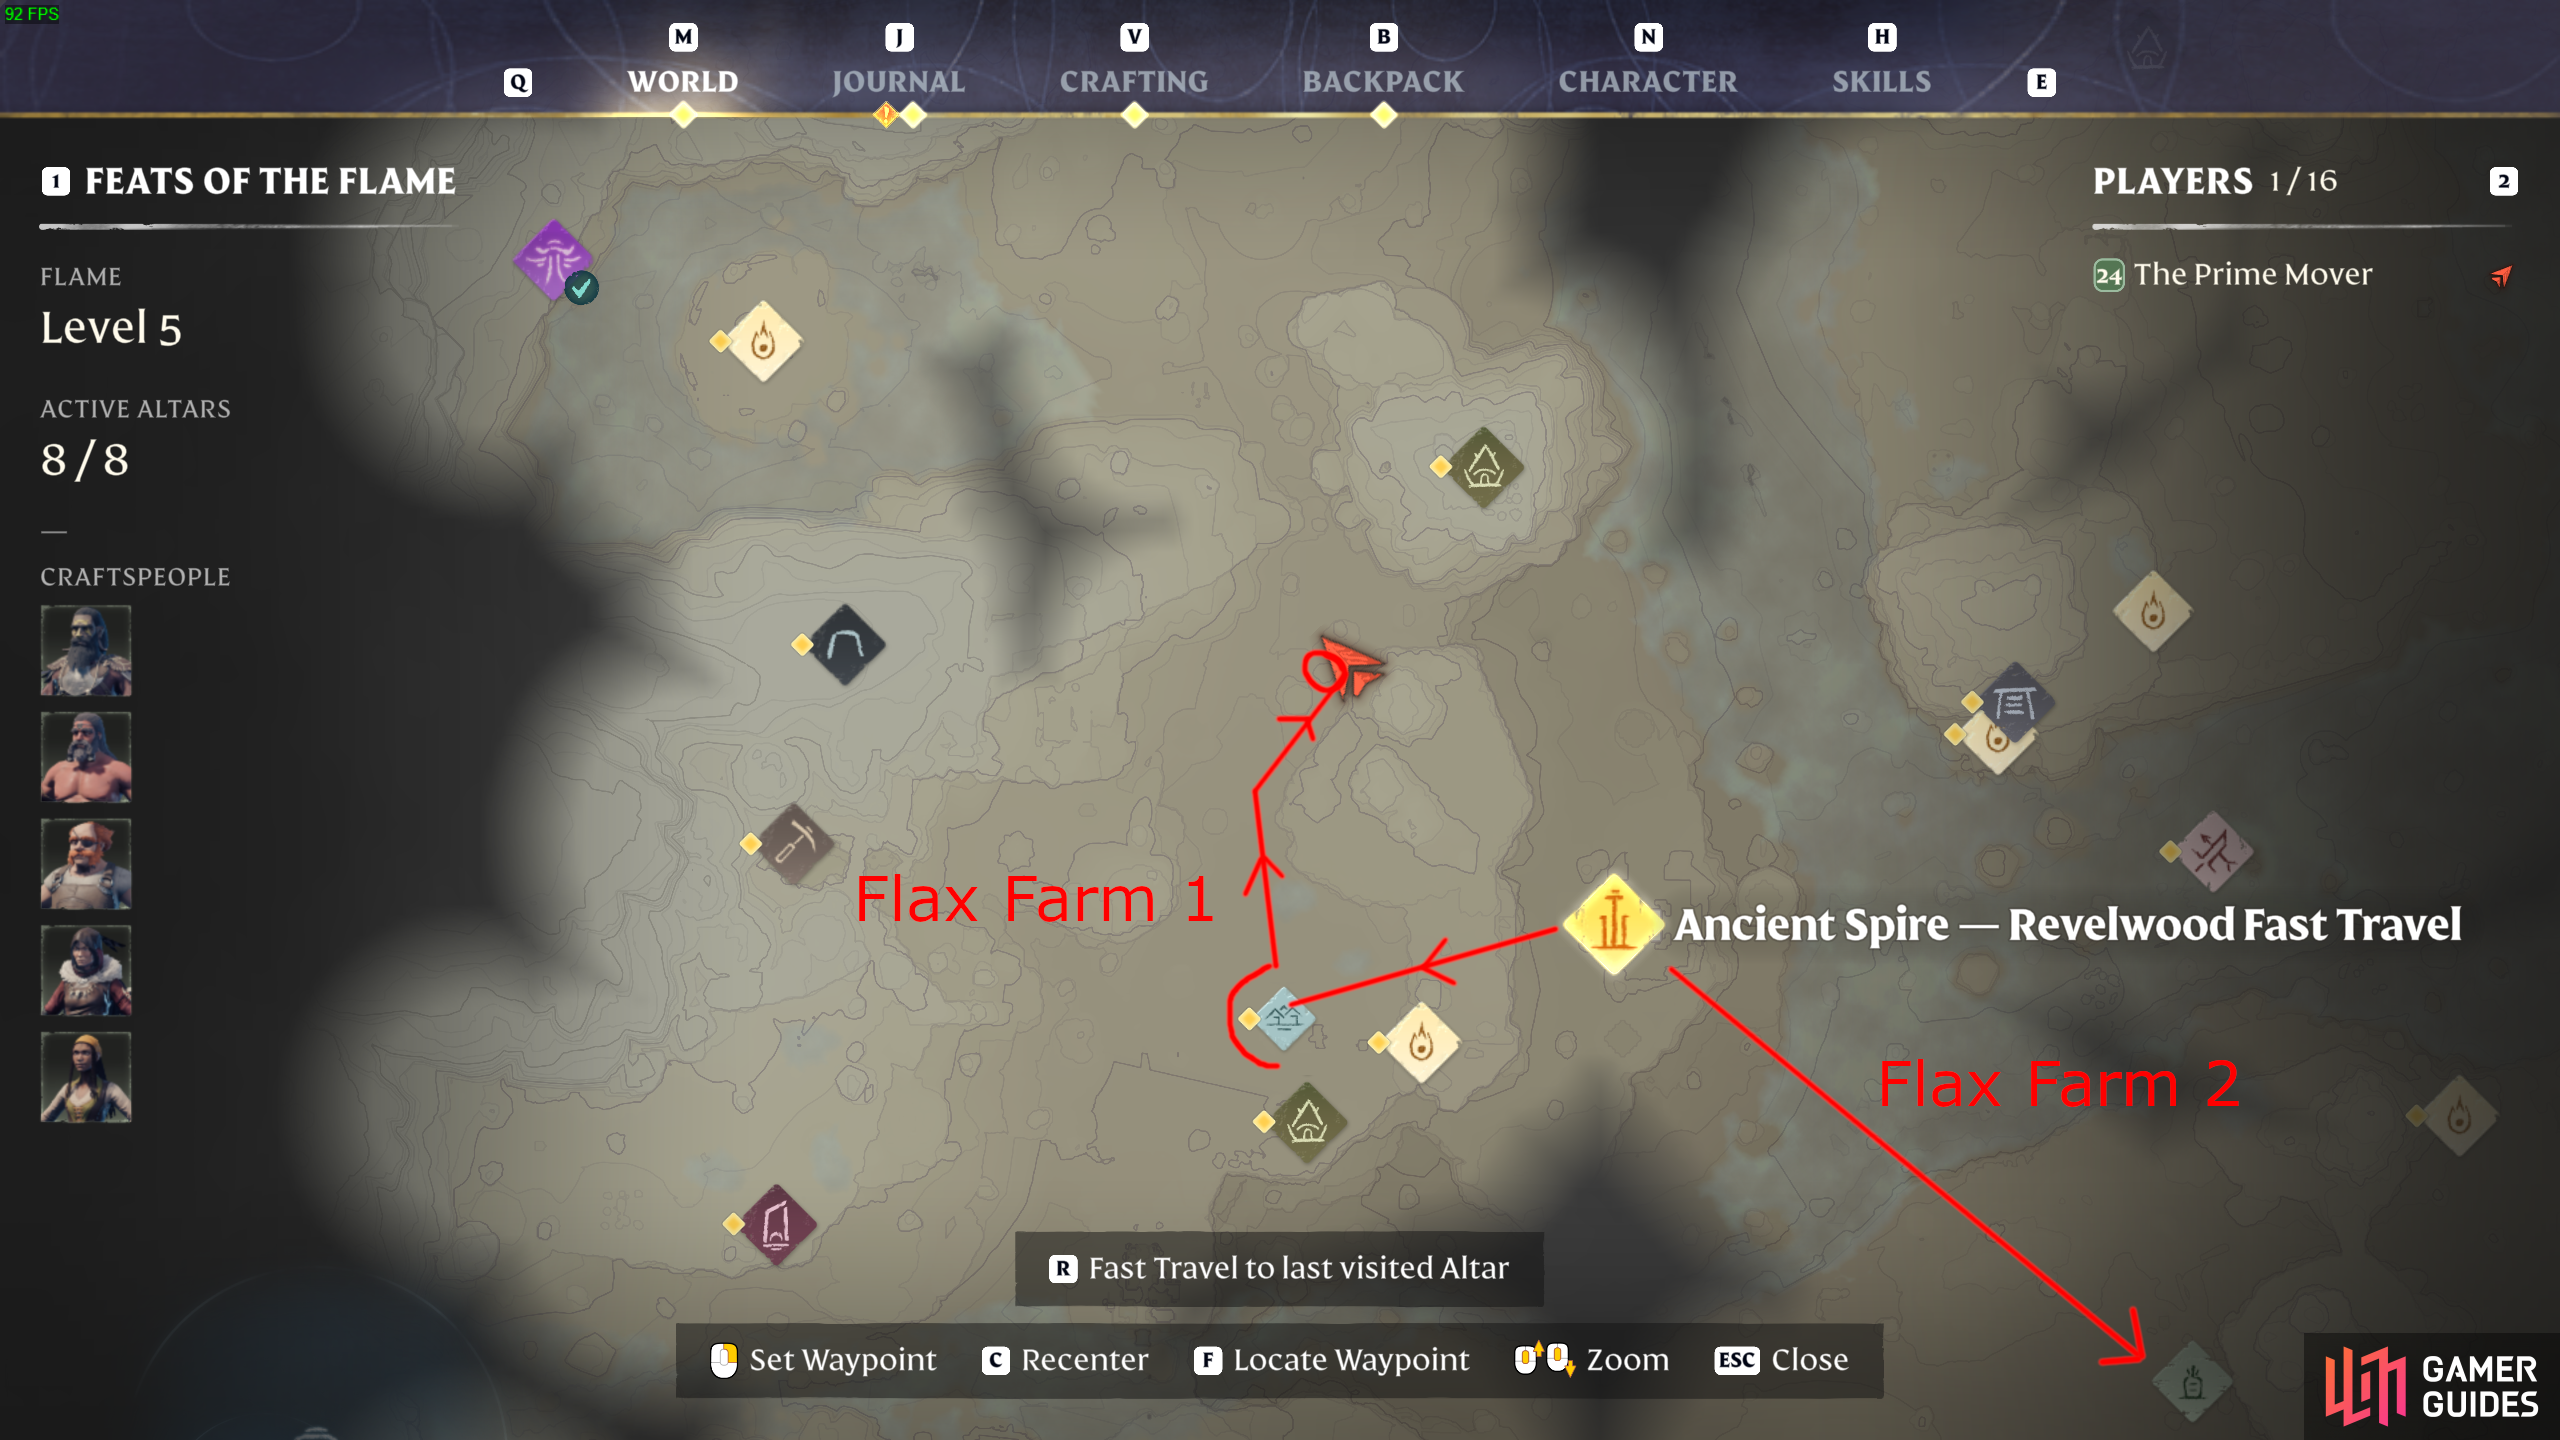 We recommend running these Flax farms as the best way to get Flax in Enshrouded.